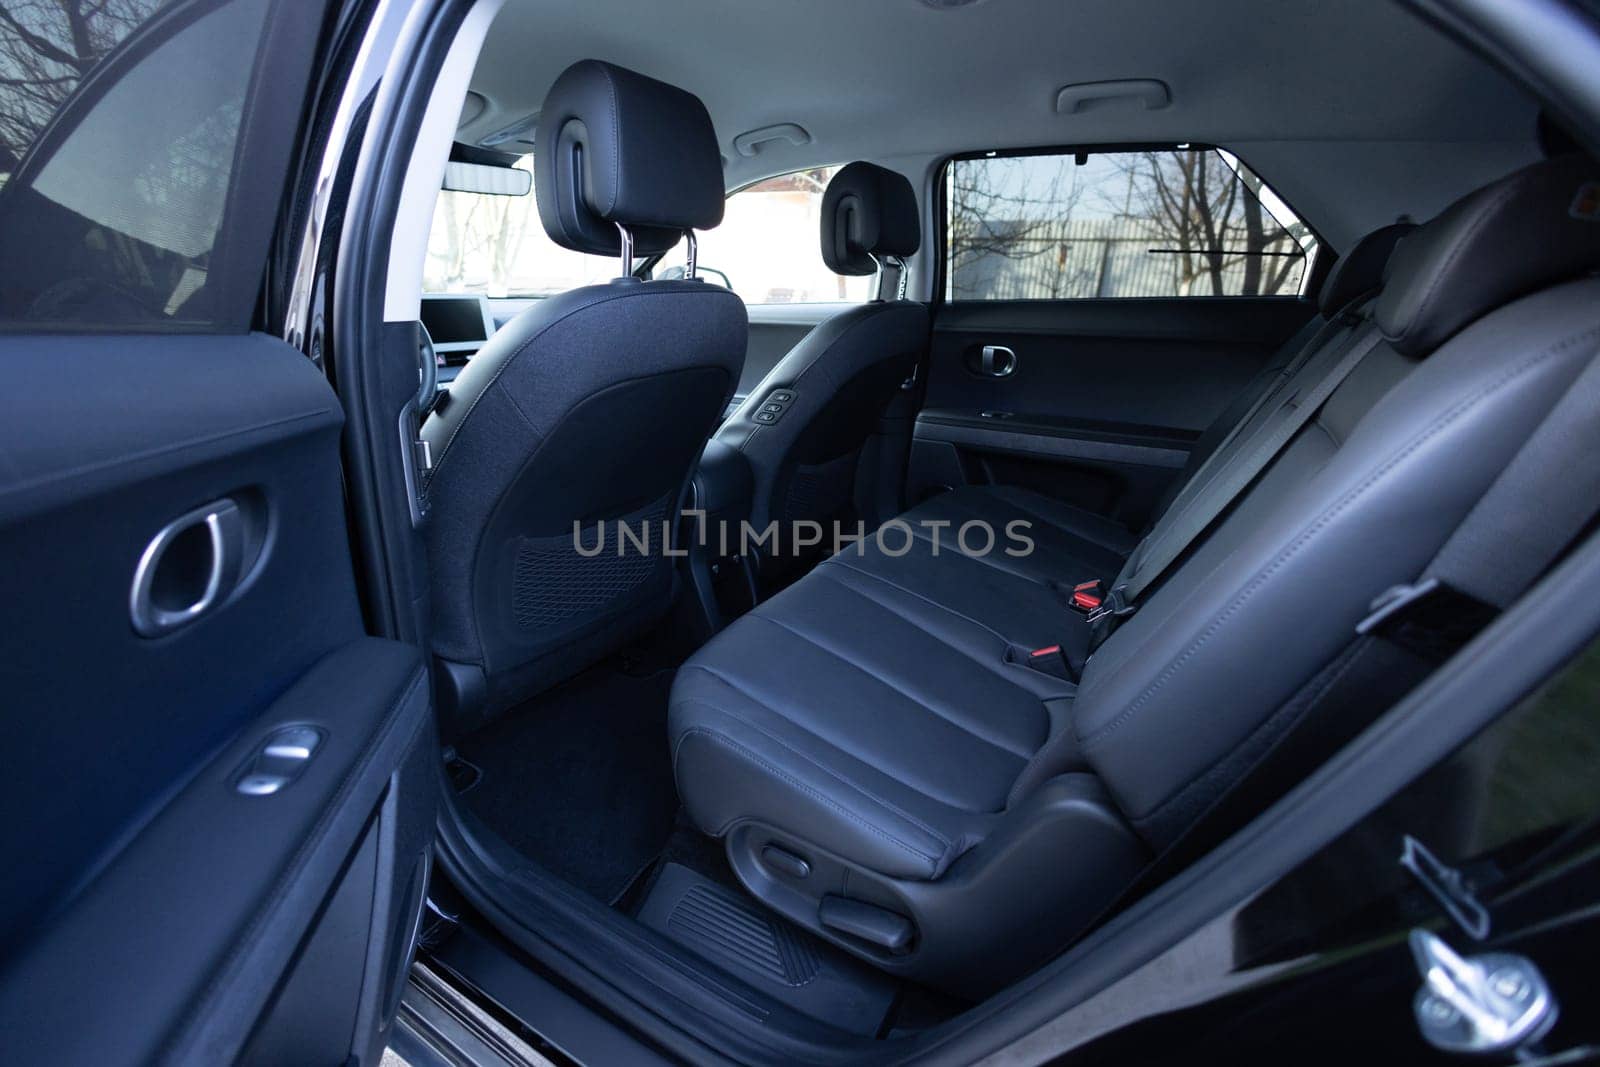 Rear leather passenger seats in modern lux electric car. Leather car passenger seat. Control unit with electric seat adjustment media system for rear passengers in luxury car. Car interior detail by uflypro